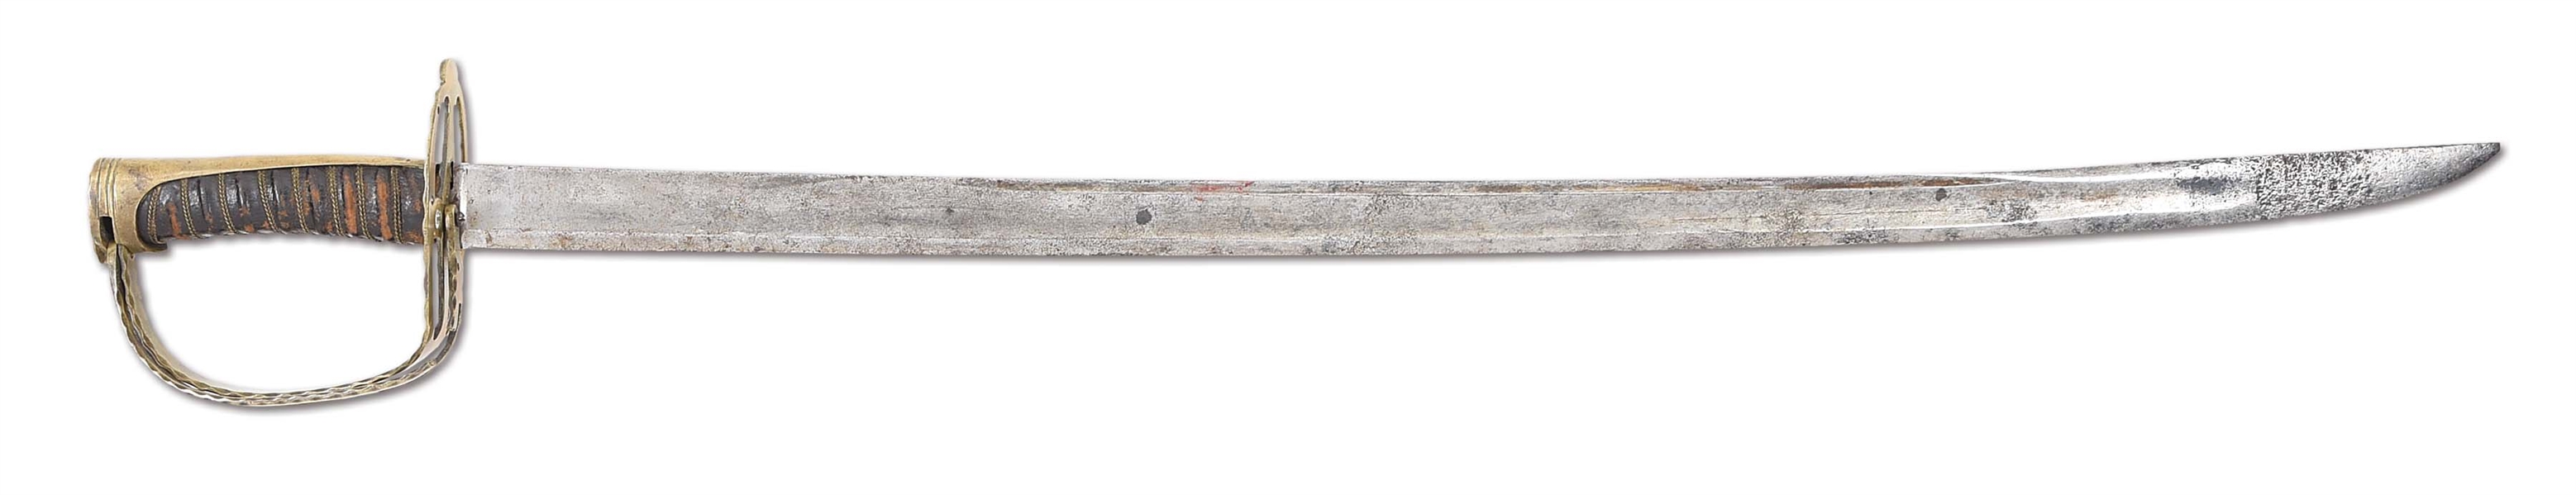 FRENCH ‘MONTMORENCY’ SABER WITH FOLDING SIDE-GUARD, C. 1780-1800